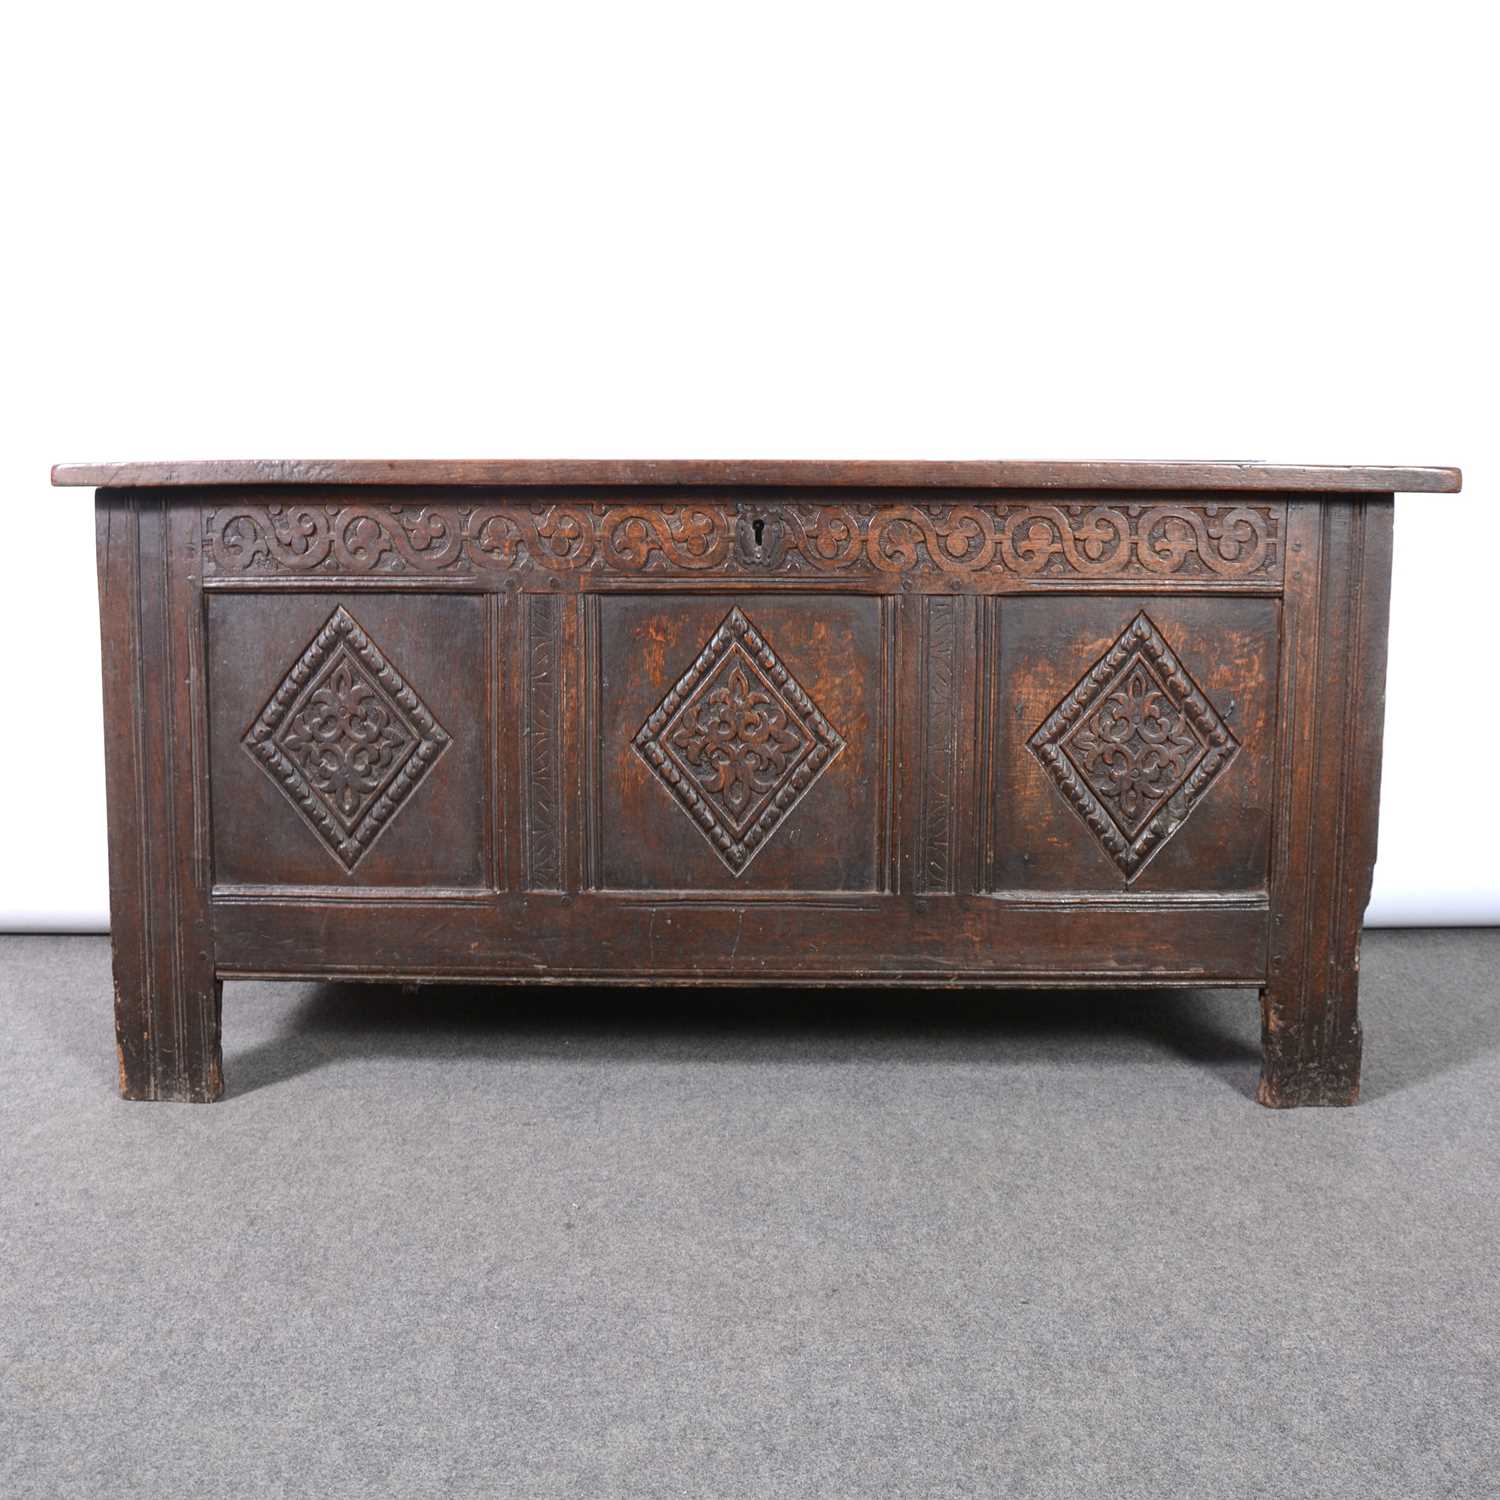 Lot 58 - Carved oak coffer, 18th century and later